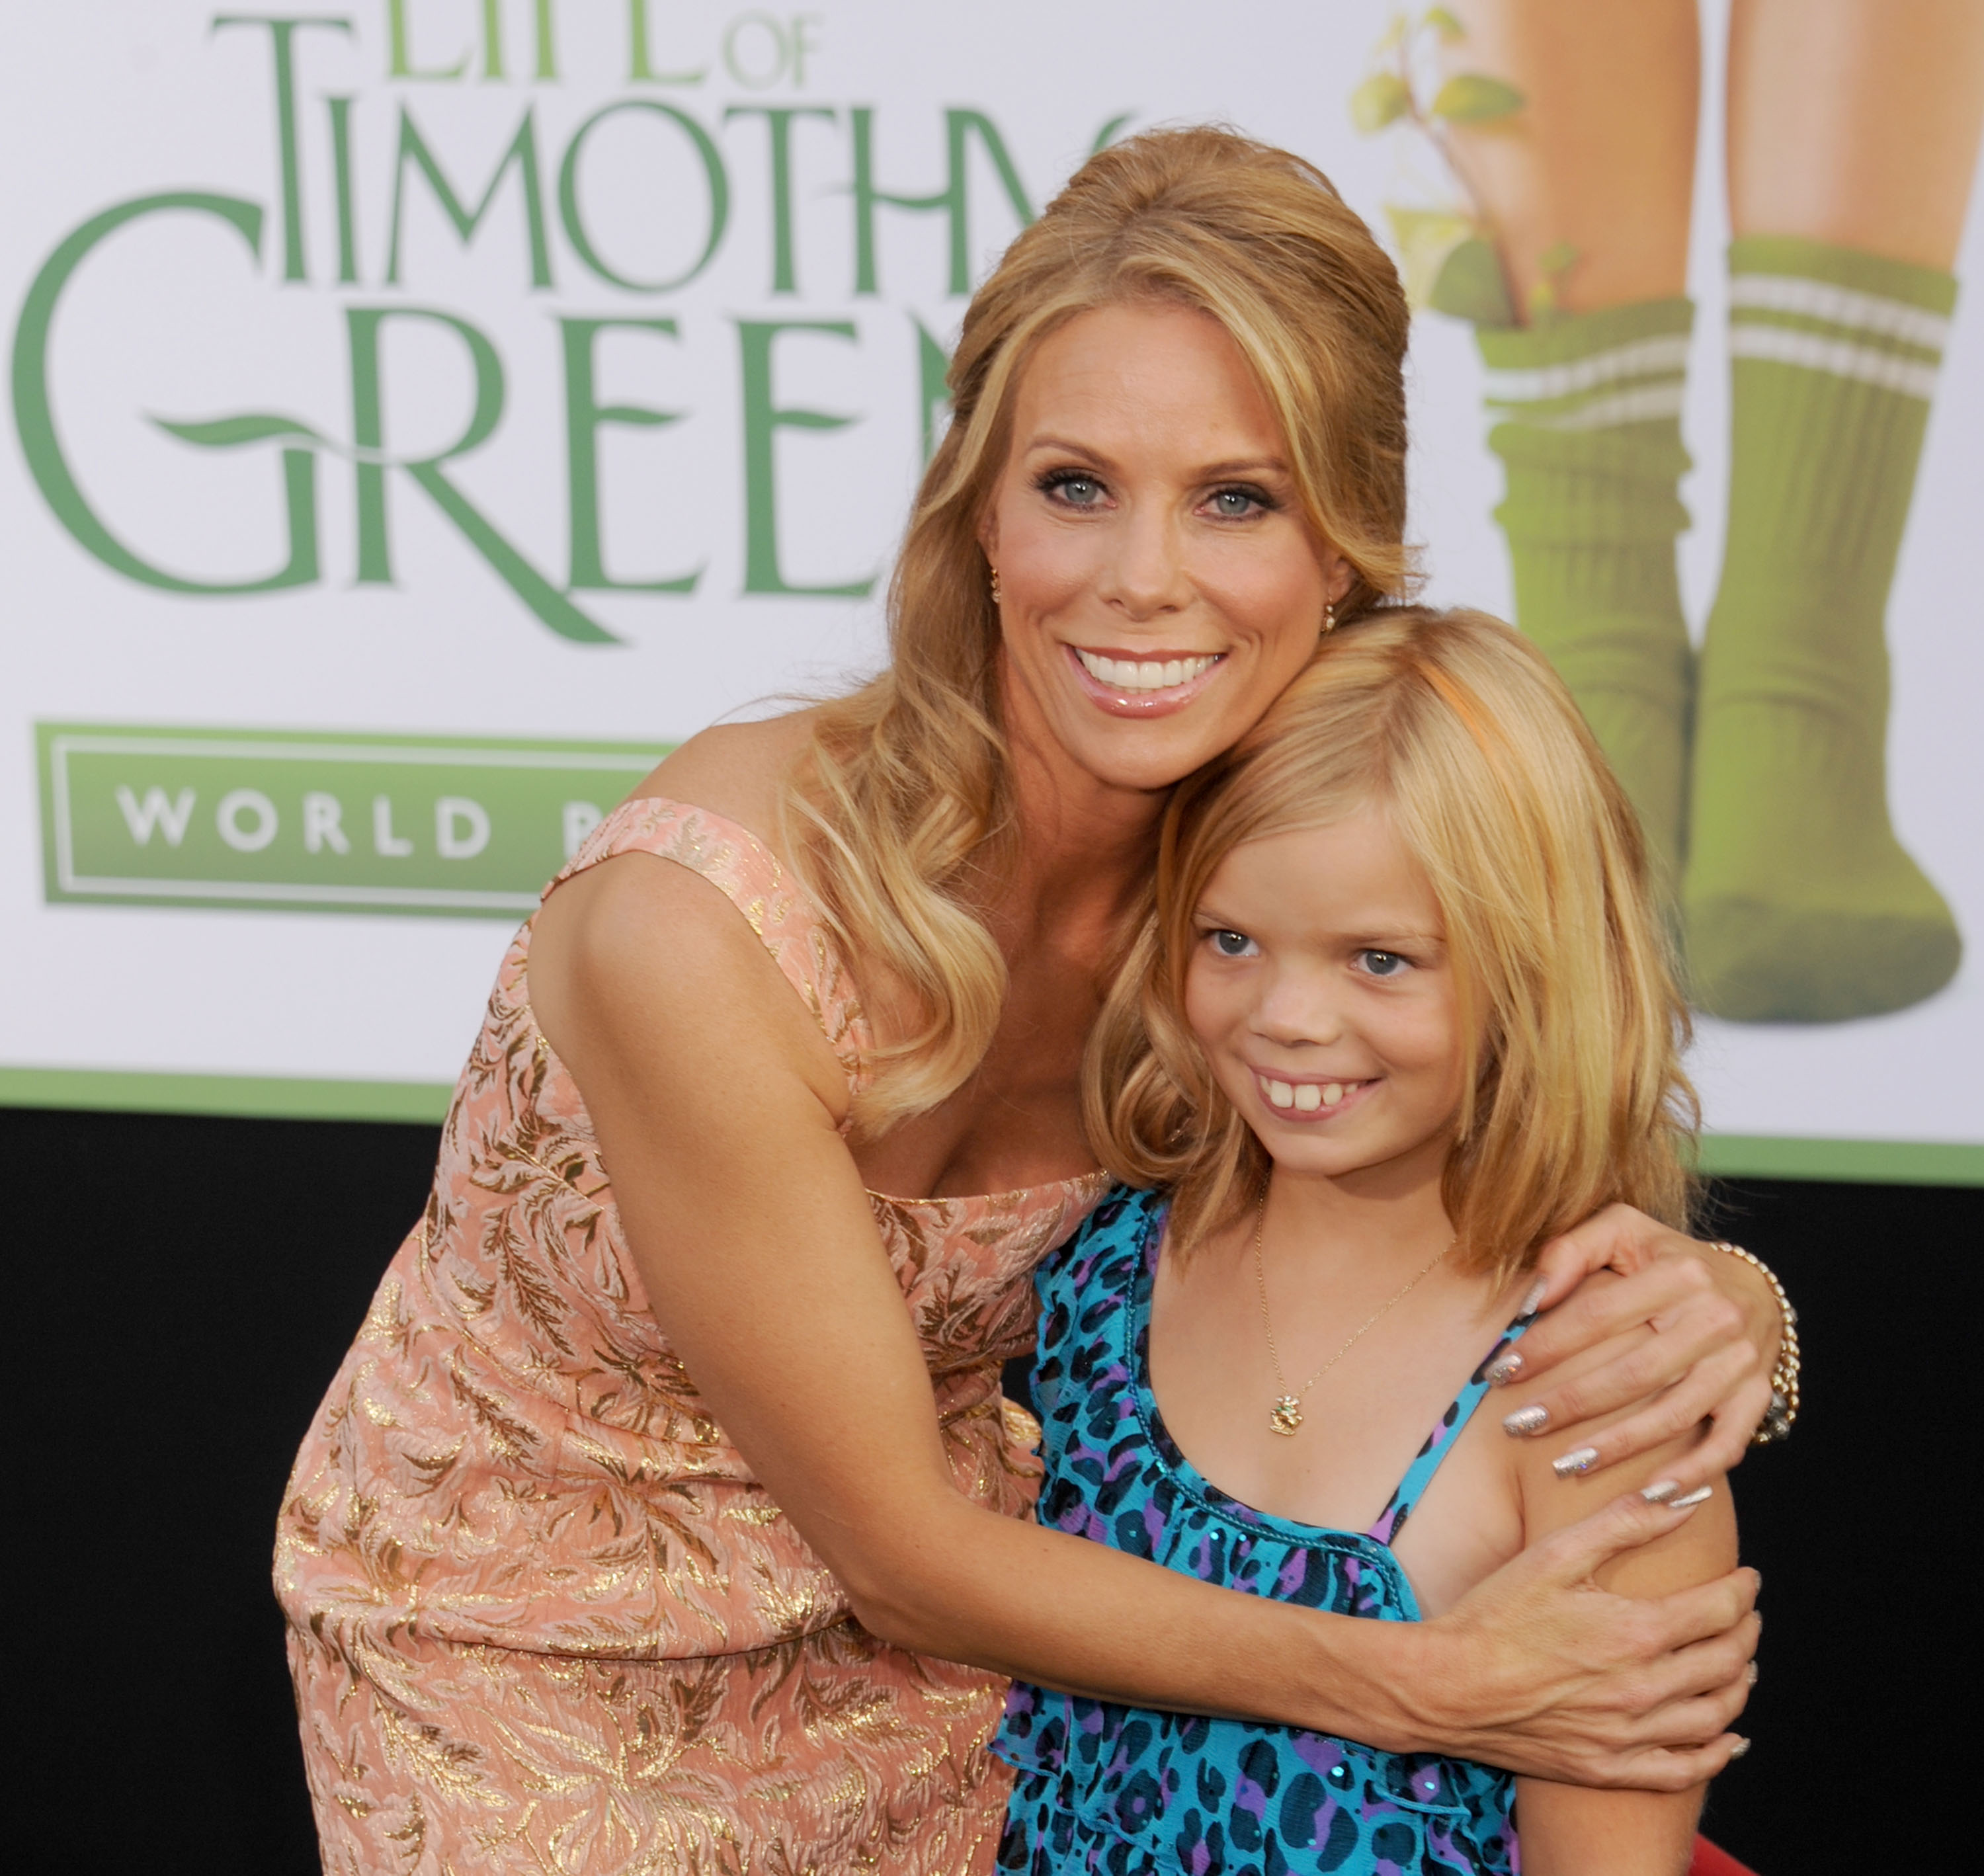 Actress Cheryl Hines and daughter Catherine Young Rose arrive at the Los Angeles premiere of "The Odd Life Of Timothy Green" at the El Capitan Theatre, on August 6, 2012, in Hollywood, California. | Source: Getty Images